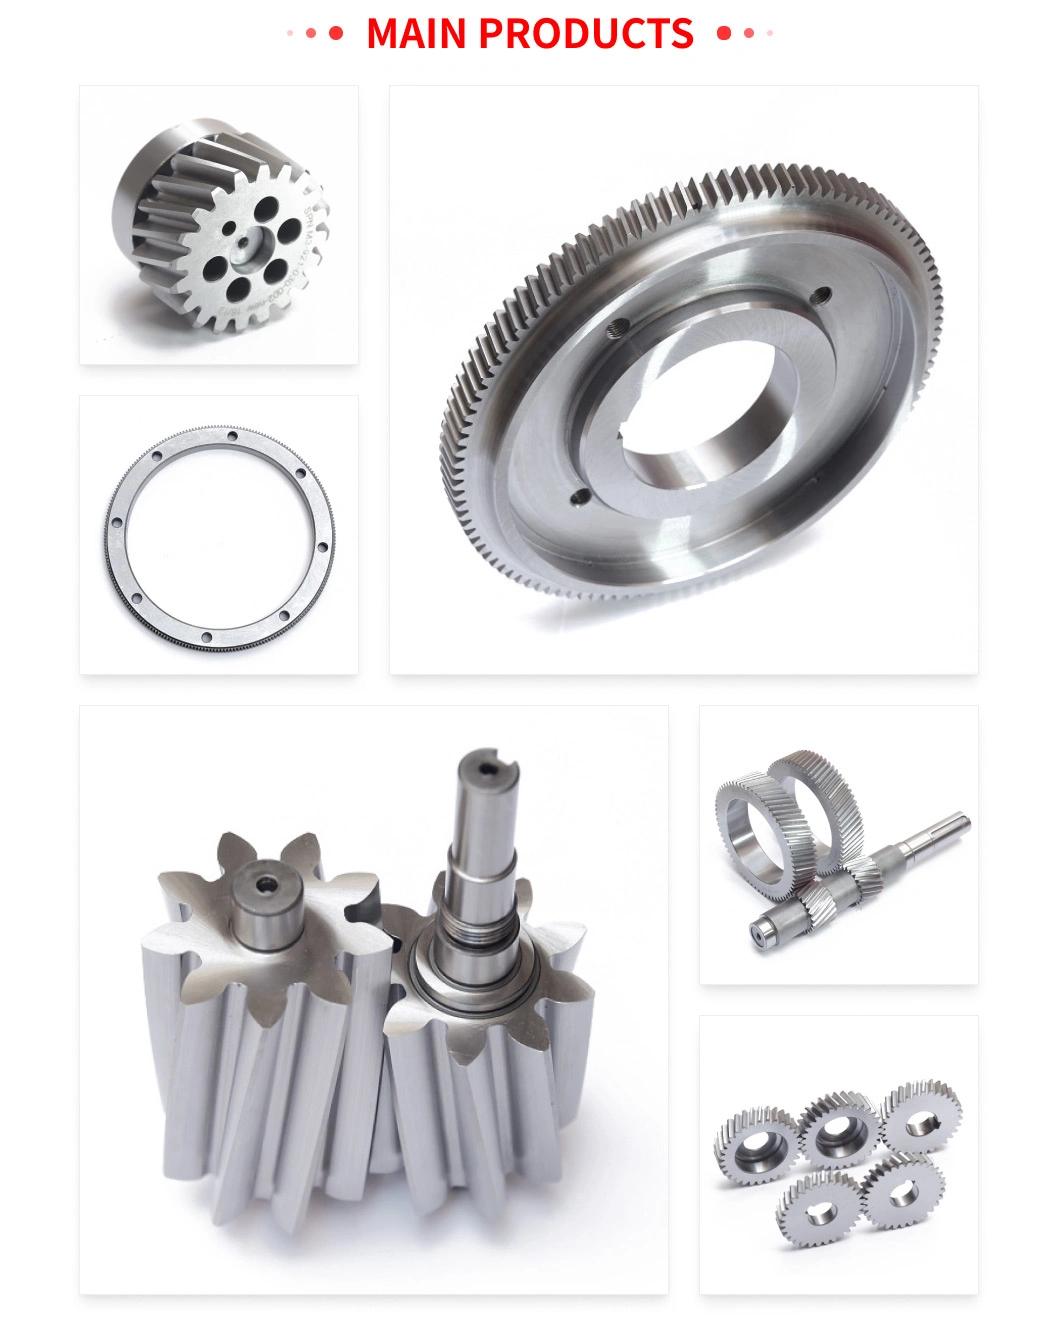 Gear Wheel Precision Forging Transmission Drive Differential Pinion Sprocket Steel Hardened Helical Worm Rack Crown Straight Spiral Spur Bevel Gears